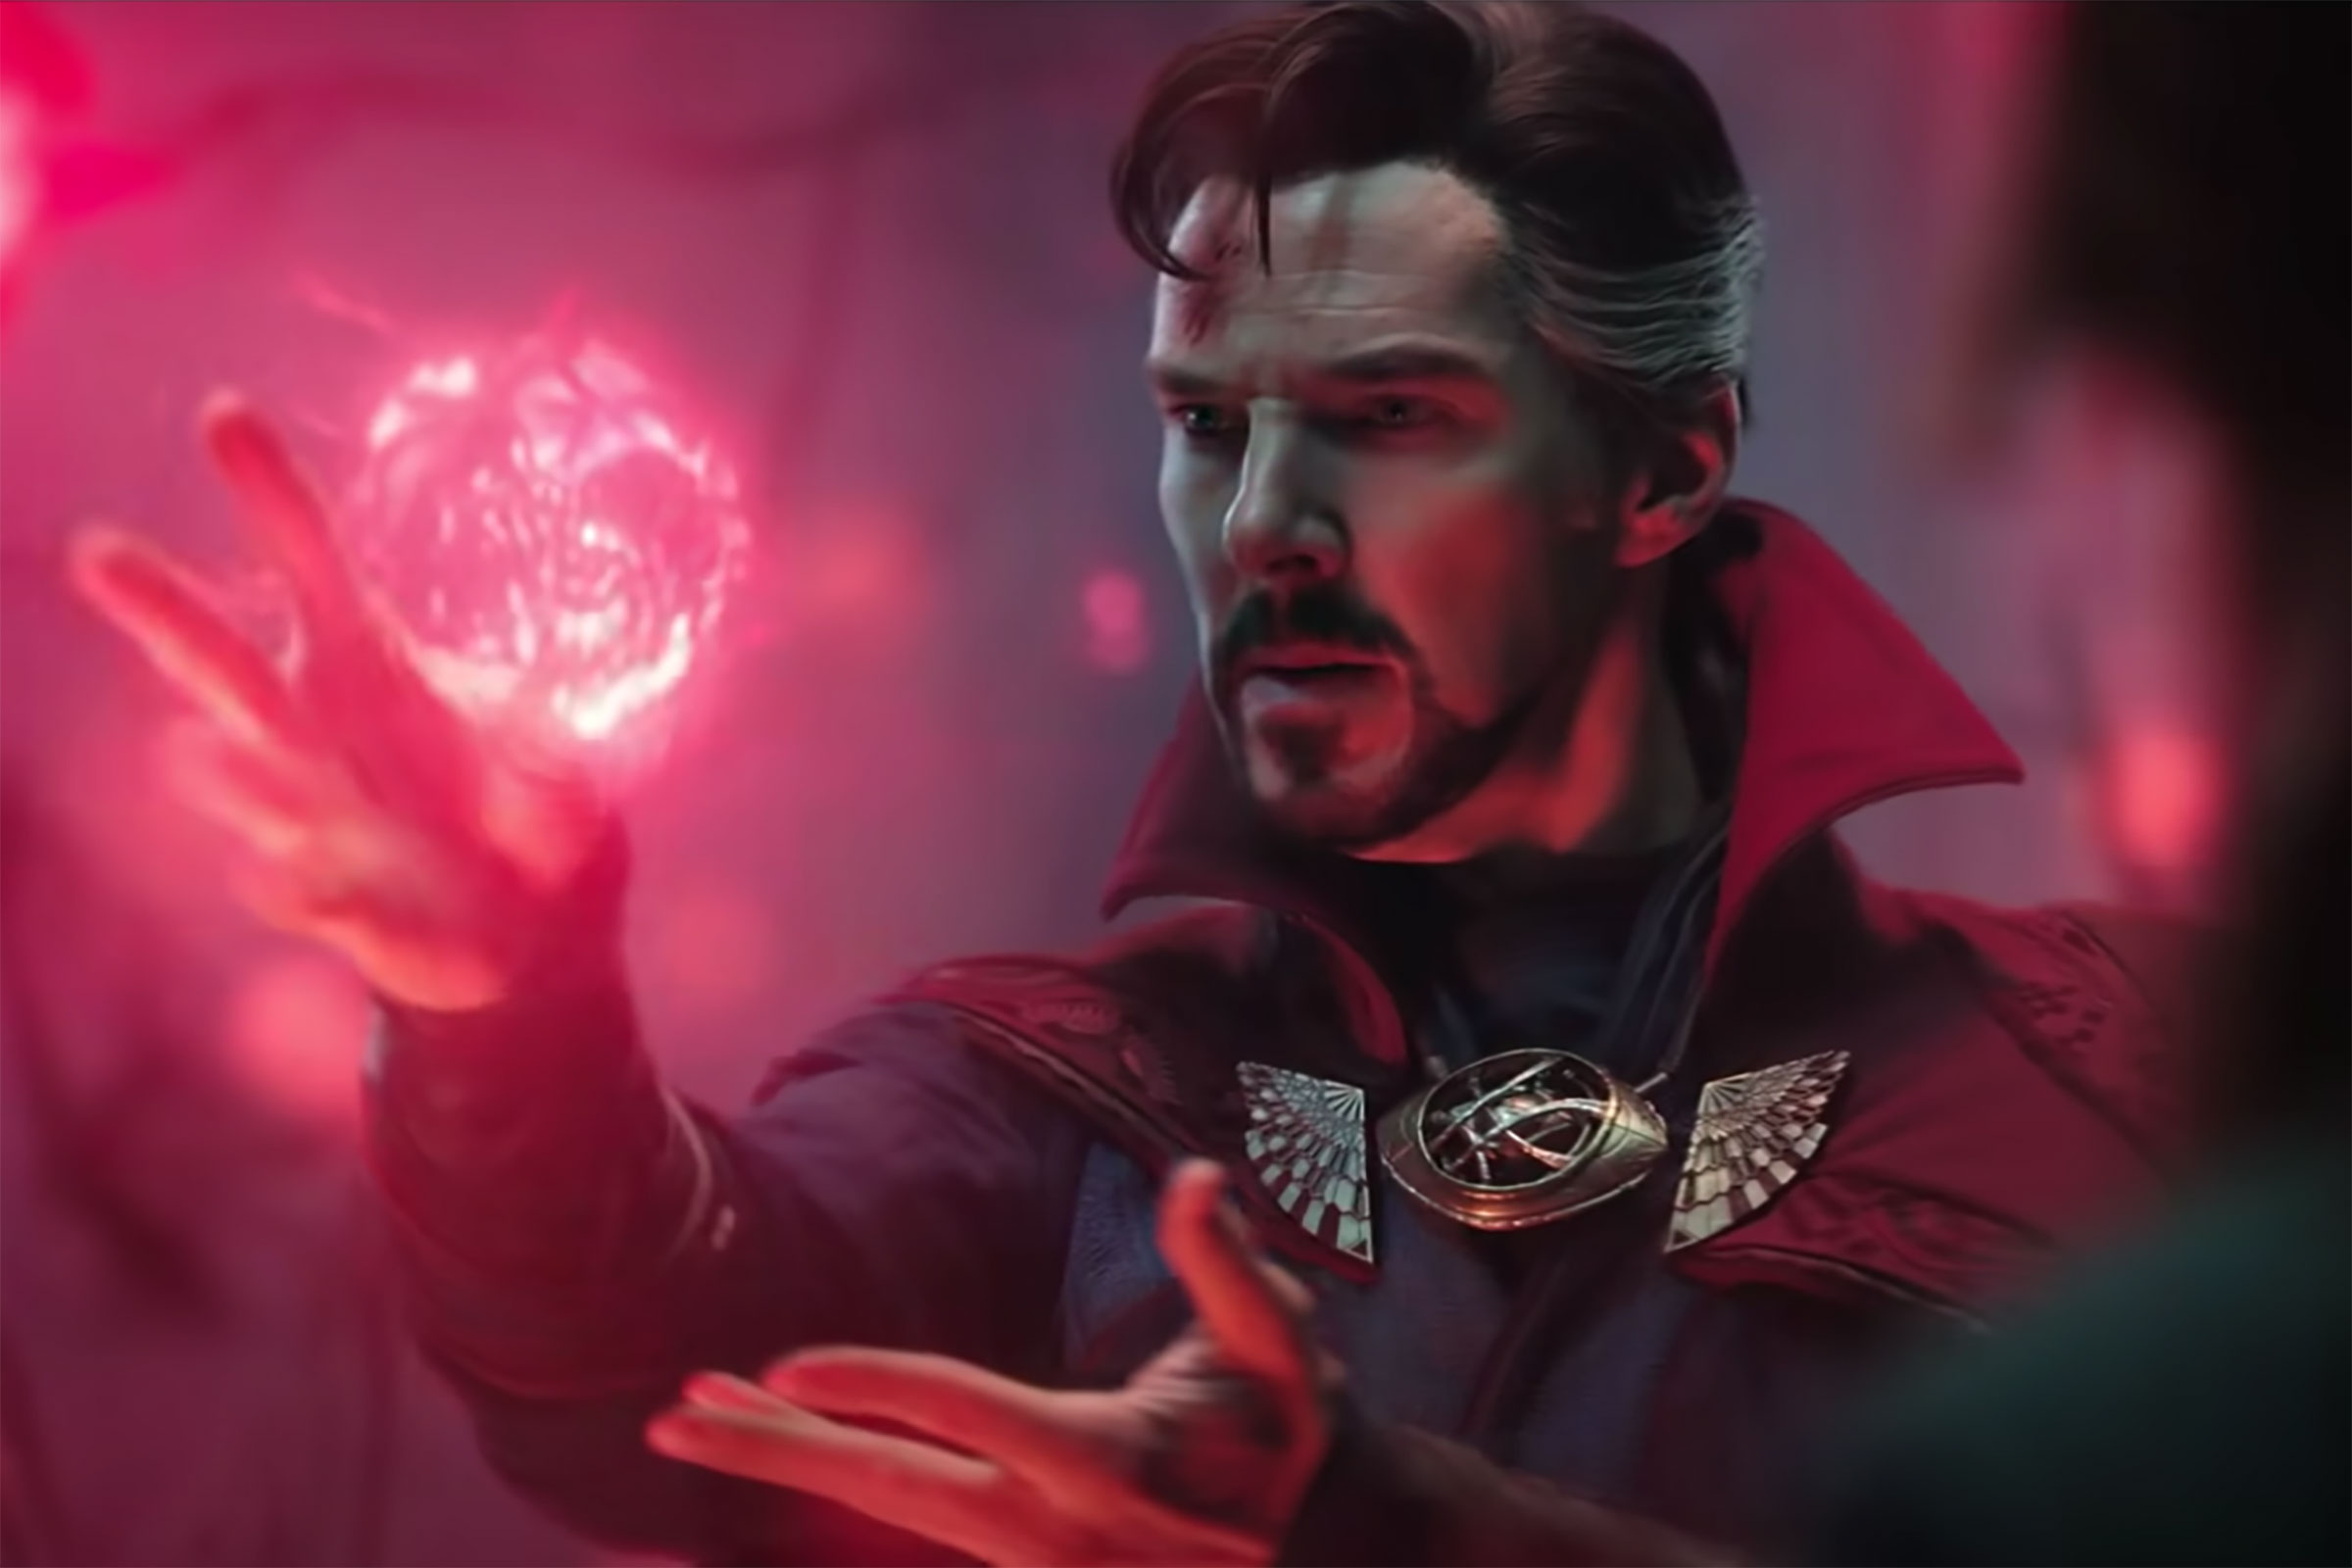 Dr. Strange in the Multiverse of Madness' both excites and disappoints